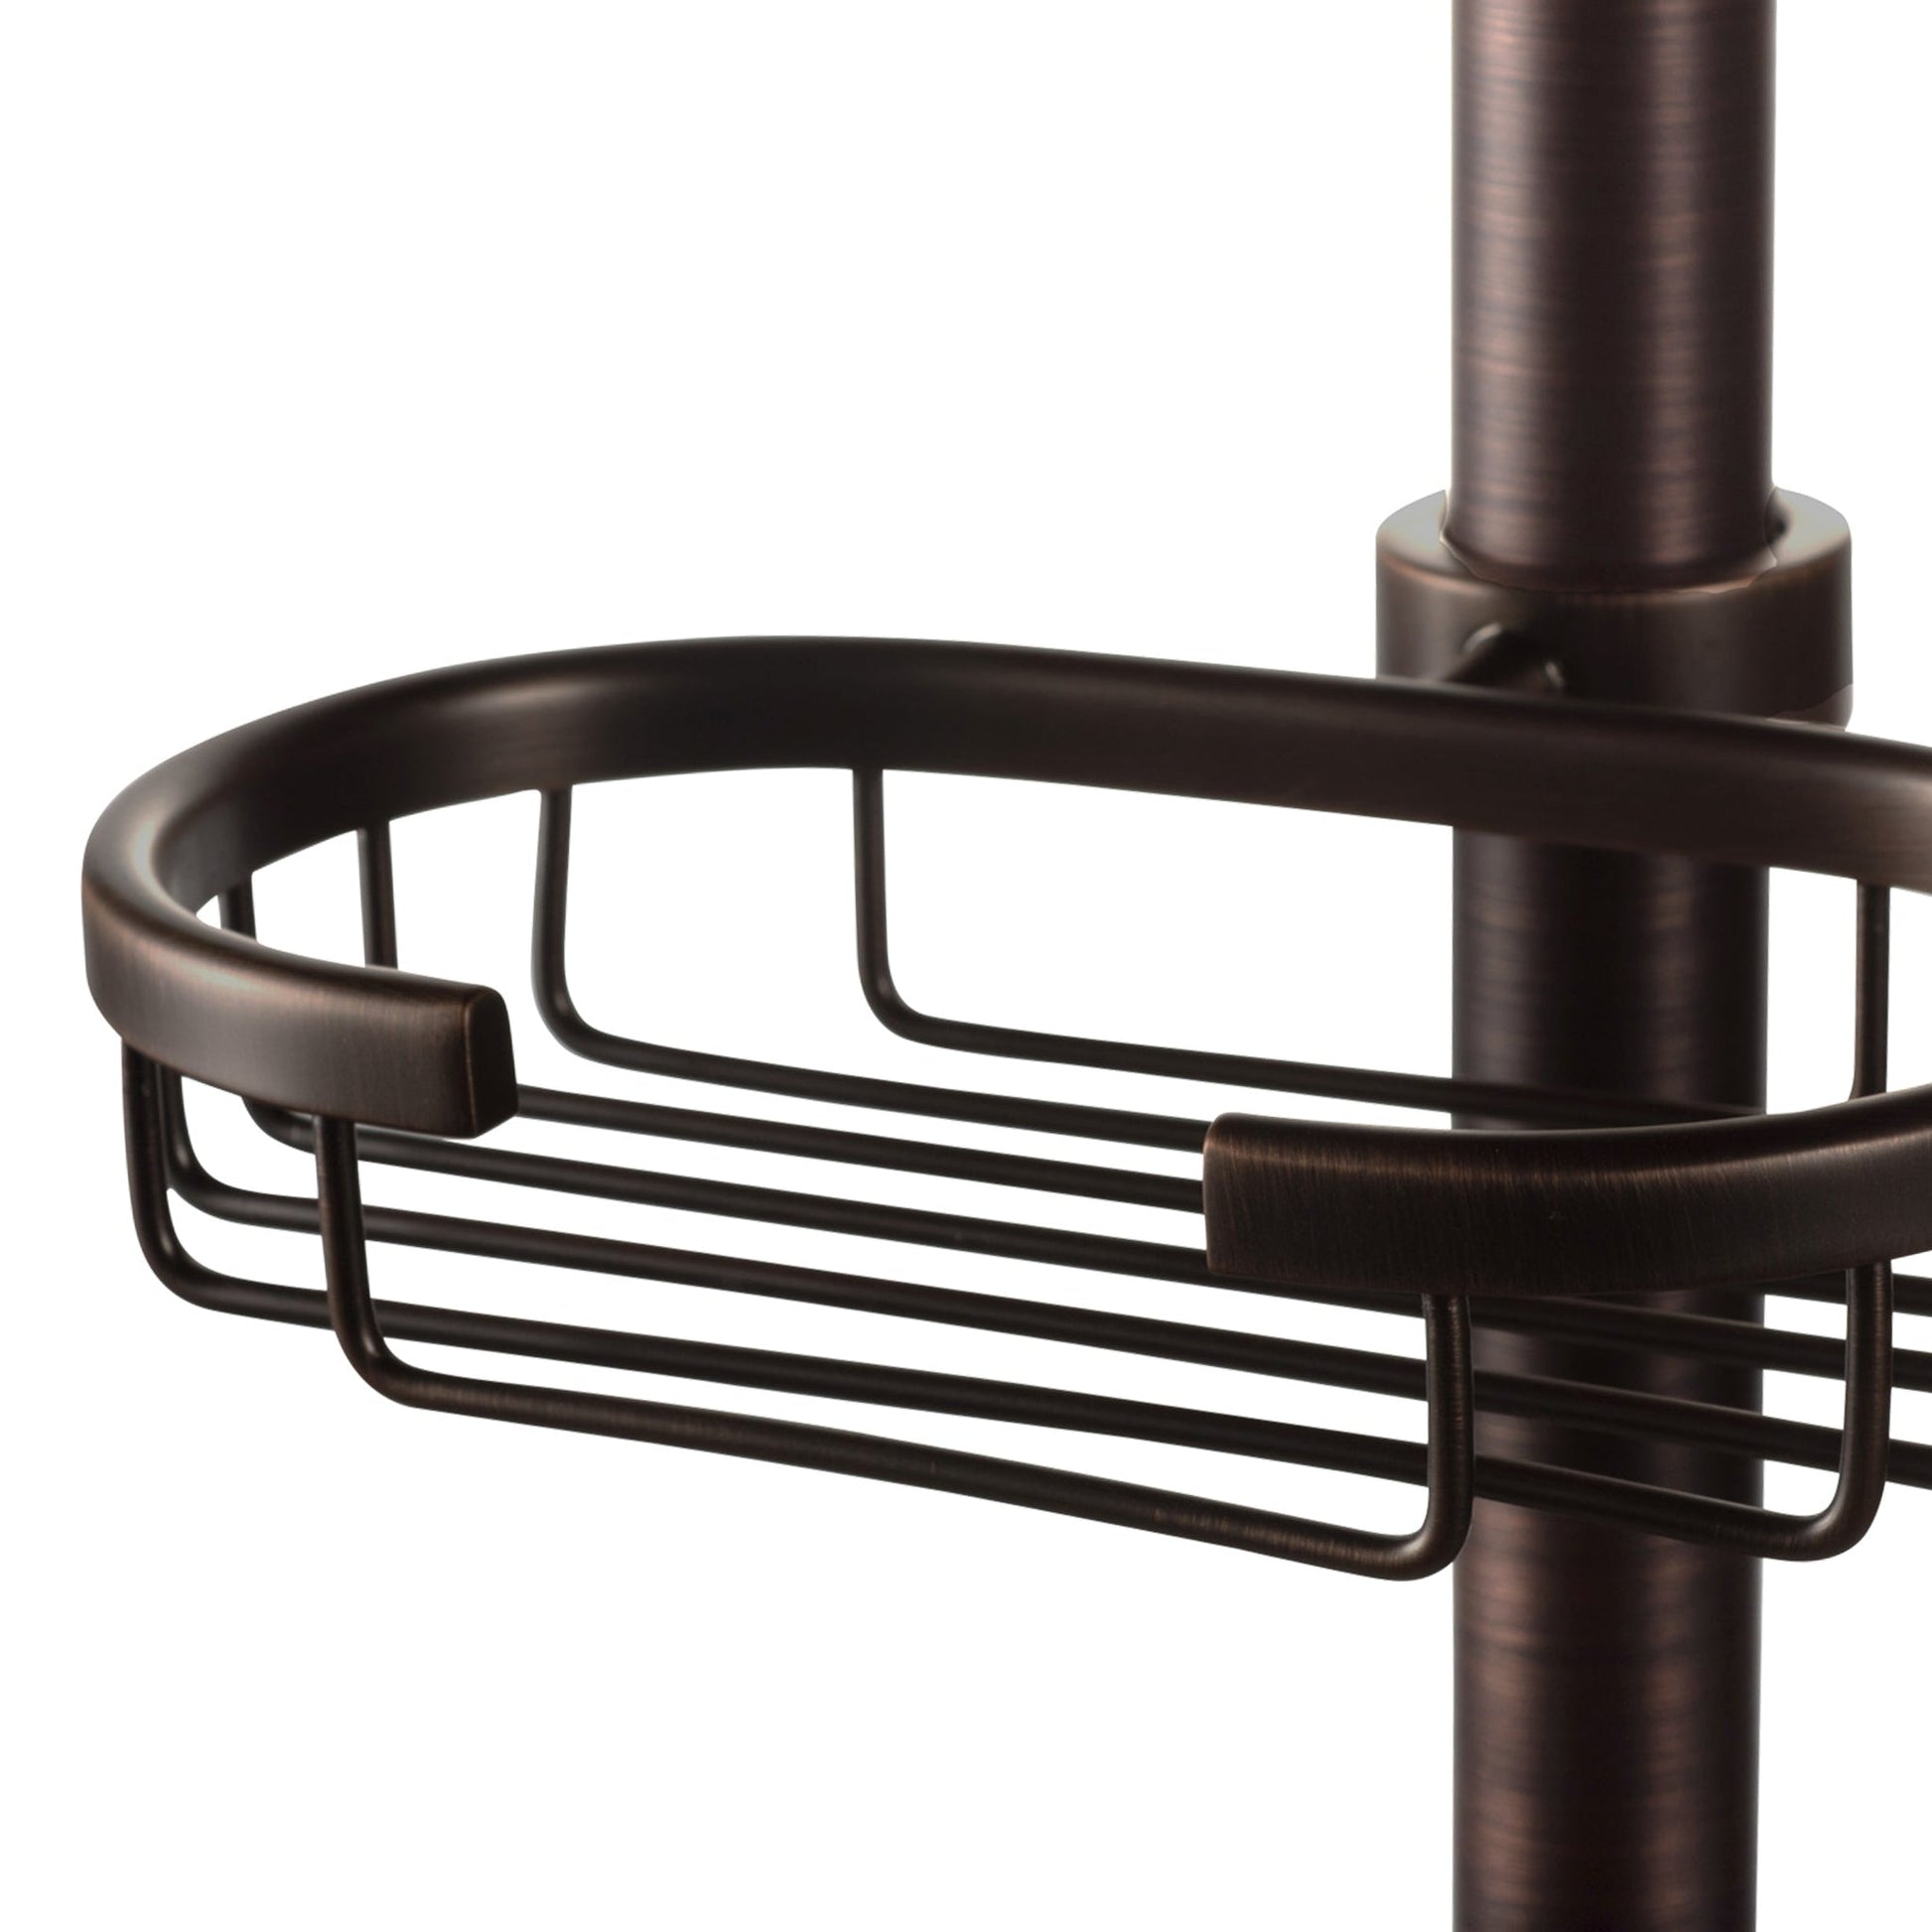 PULSE ShowerSpas Adjustable Slide Bar With Built-in Soap Dish Shower System Accessory in Oil Rubbed Bronze Finish